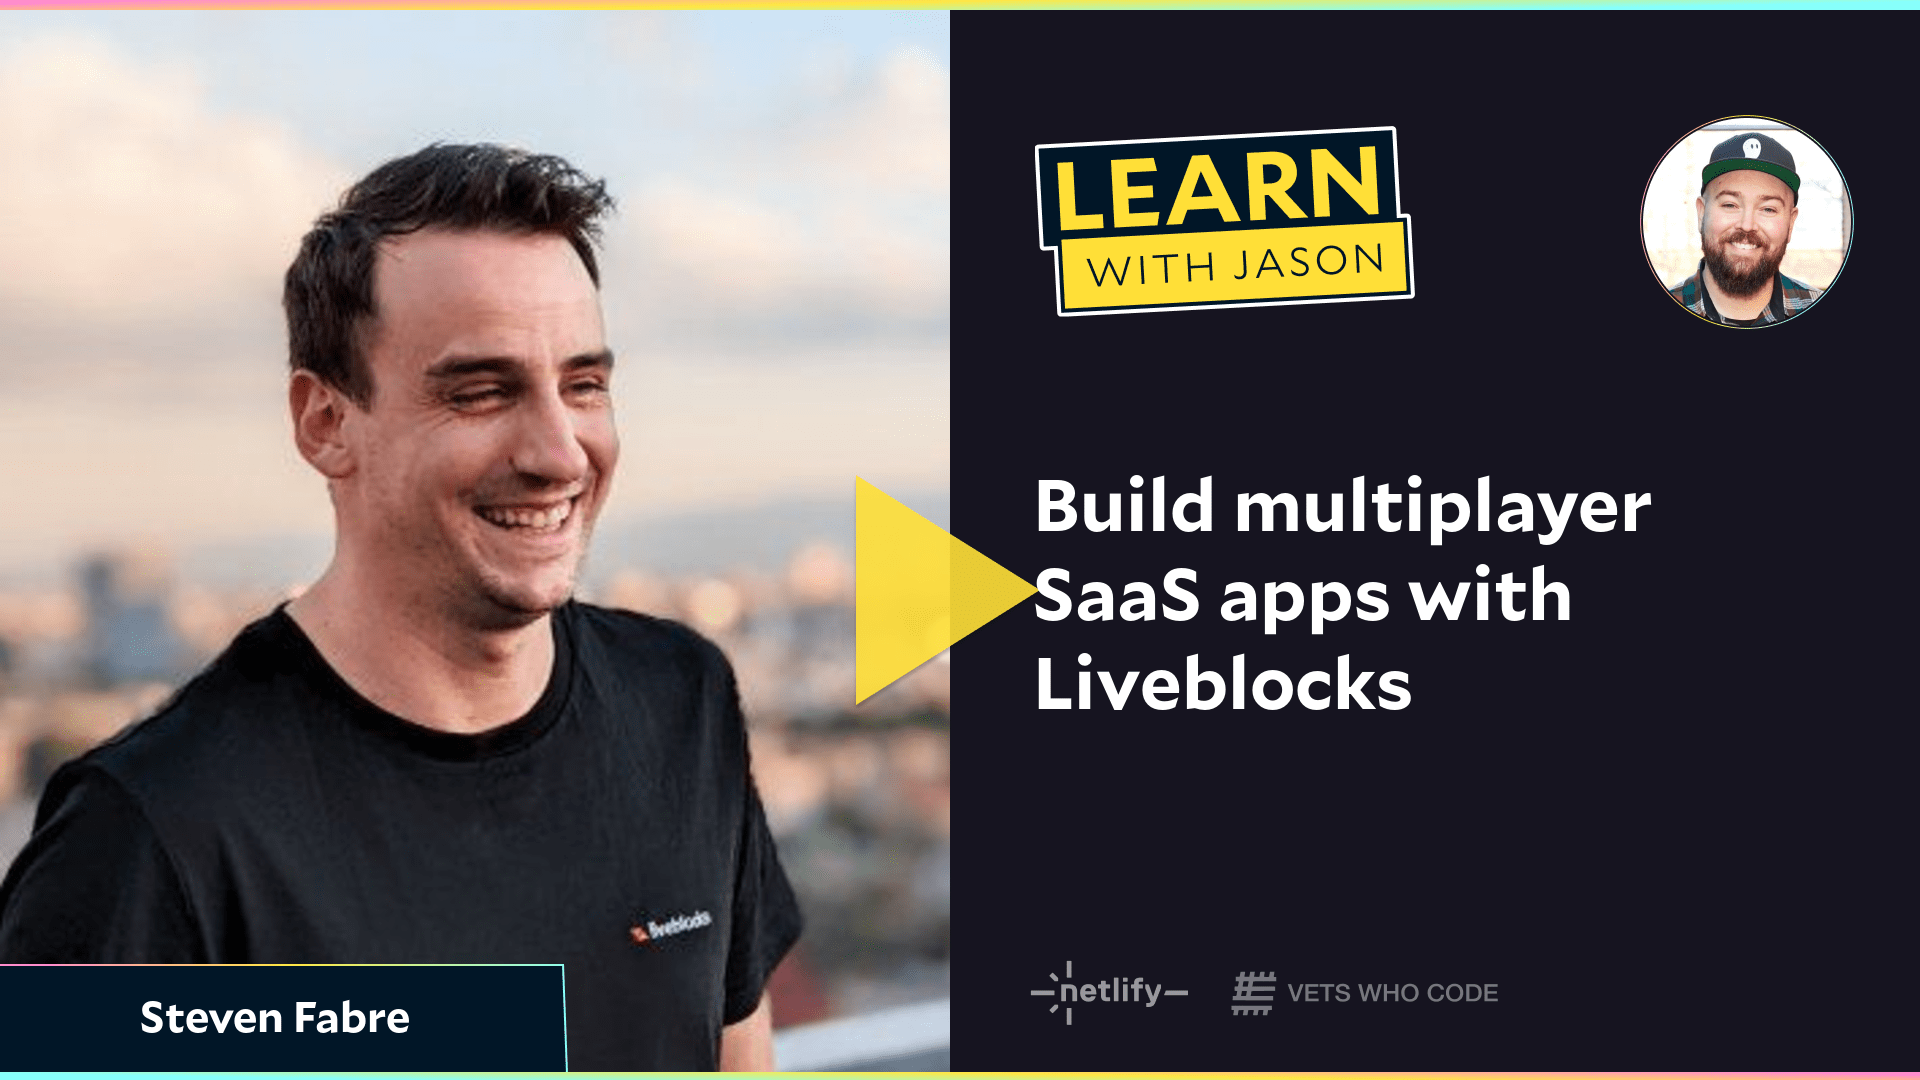 Build multiplayer SaaS apps with Liveblocks (with Steven Fabre)